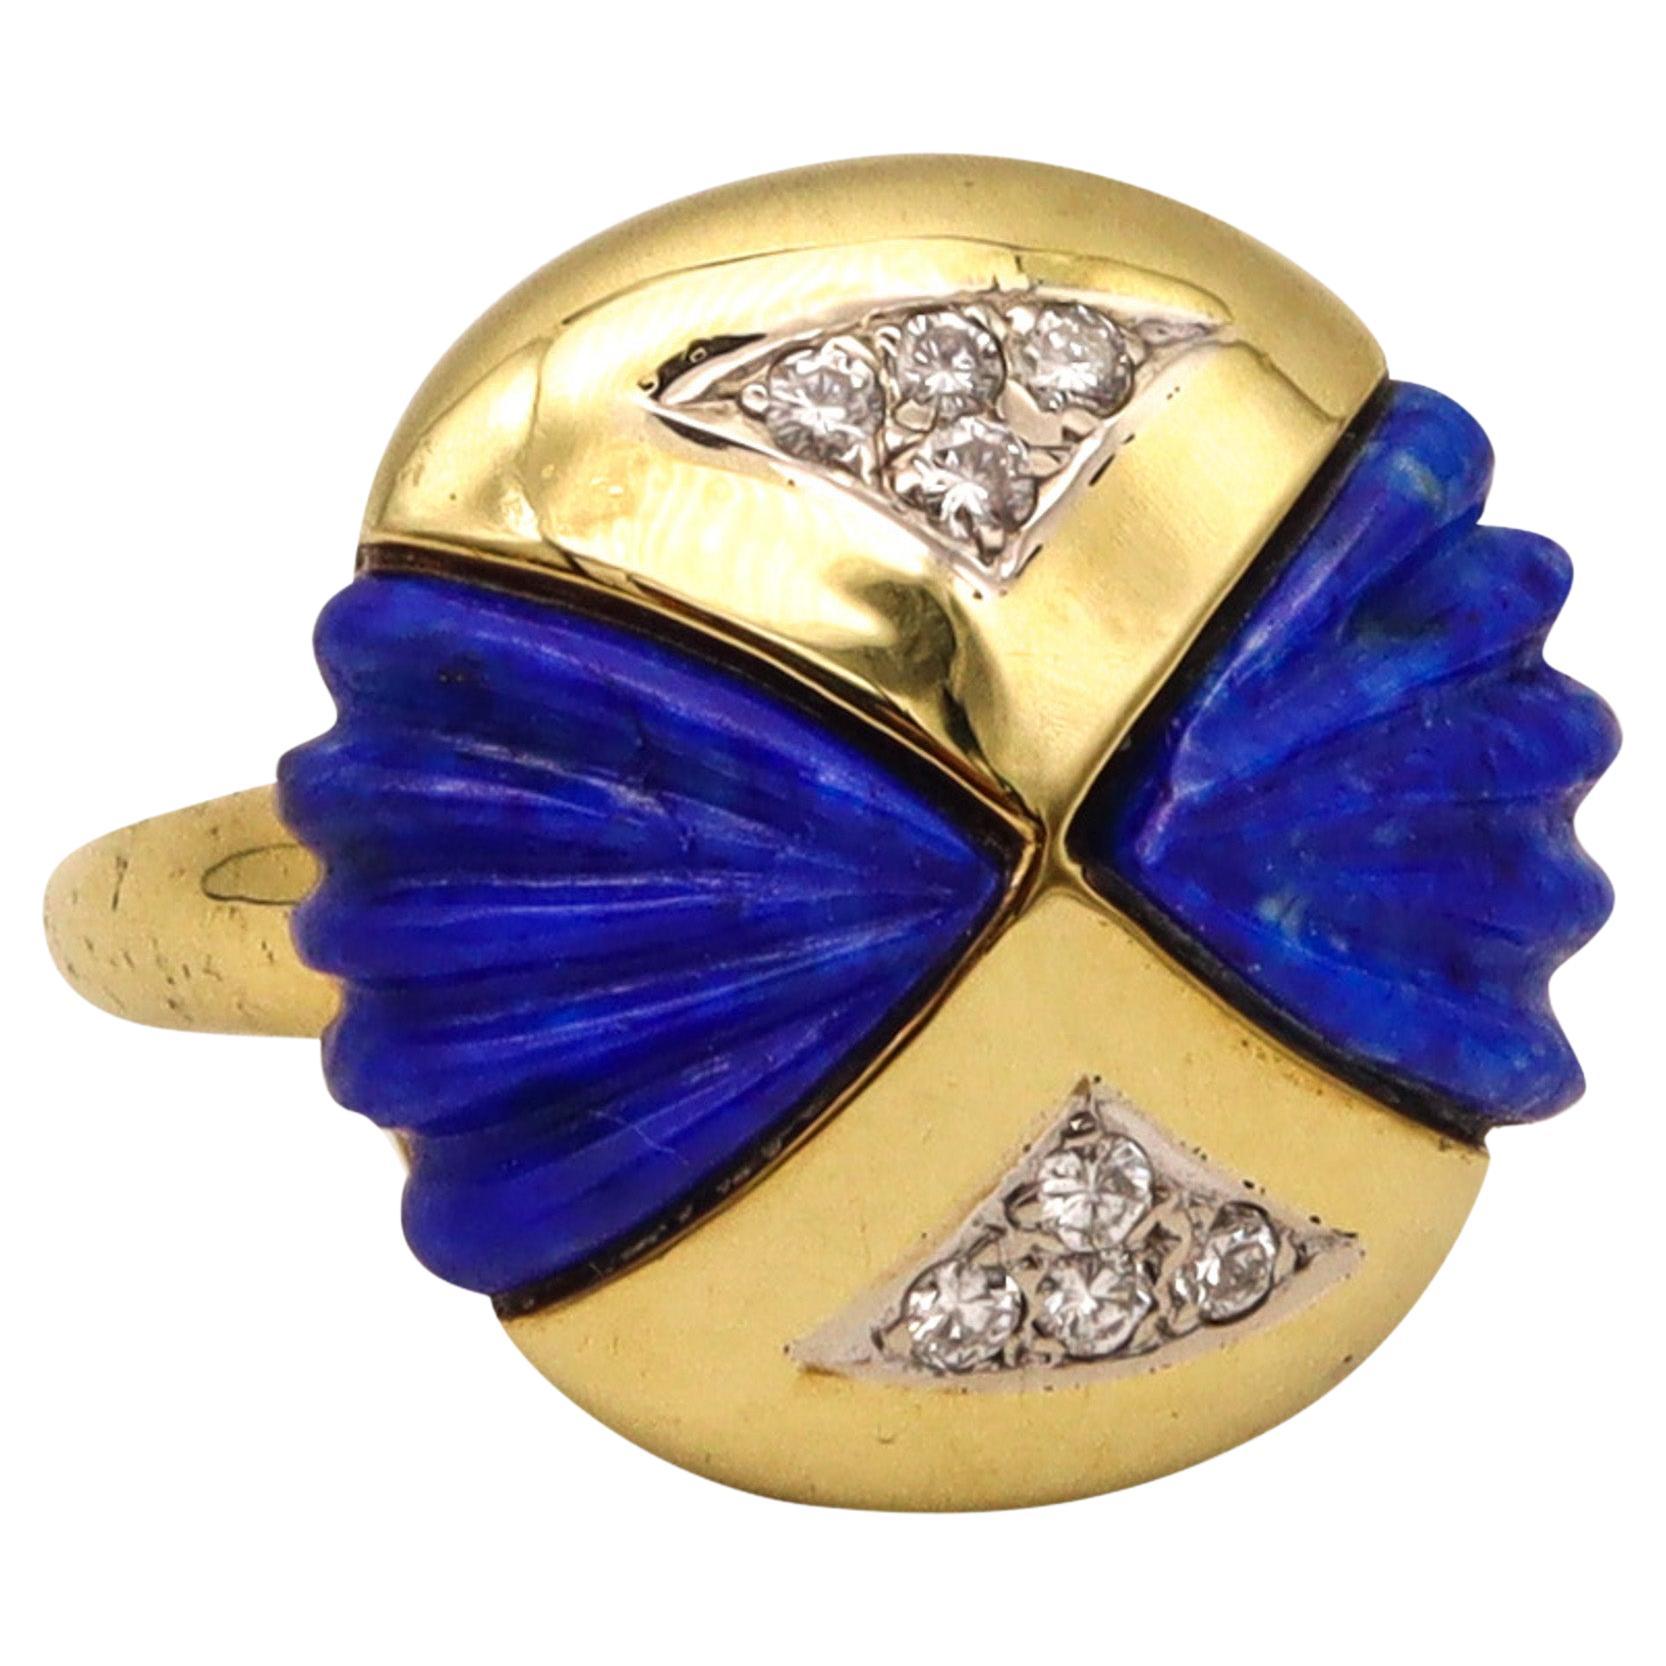 Modernist Sculptural Ring In 18Kt Yellow Gold With 3.24 Ctw Diamonds And Lapis For Sale